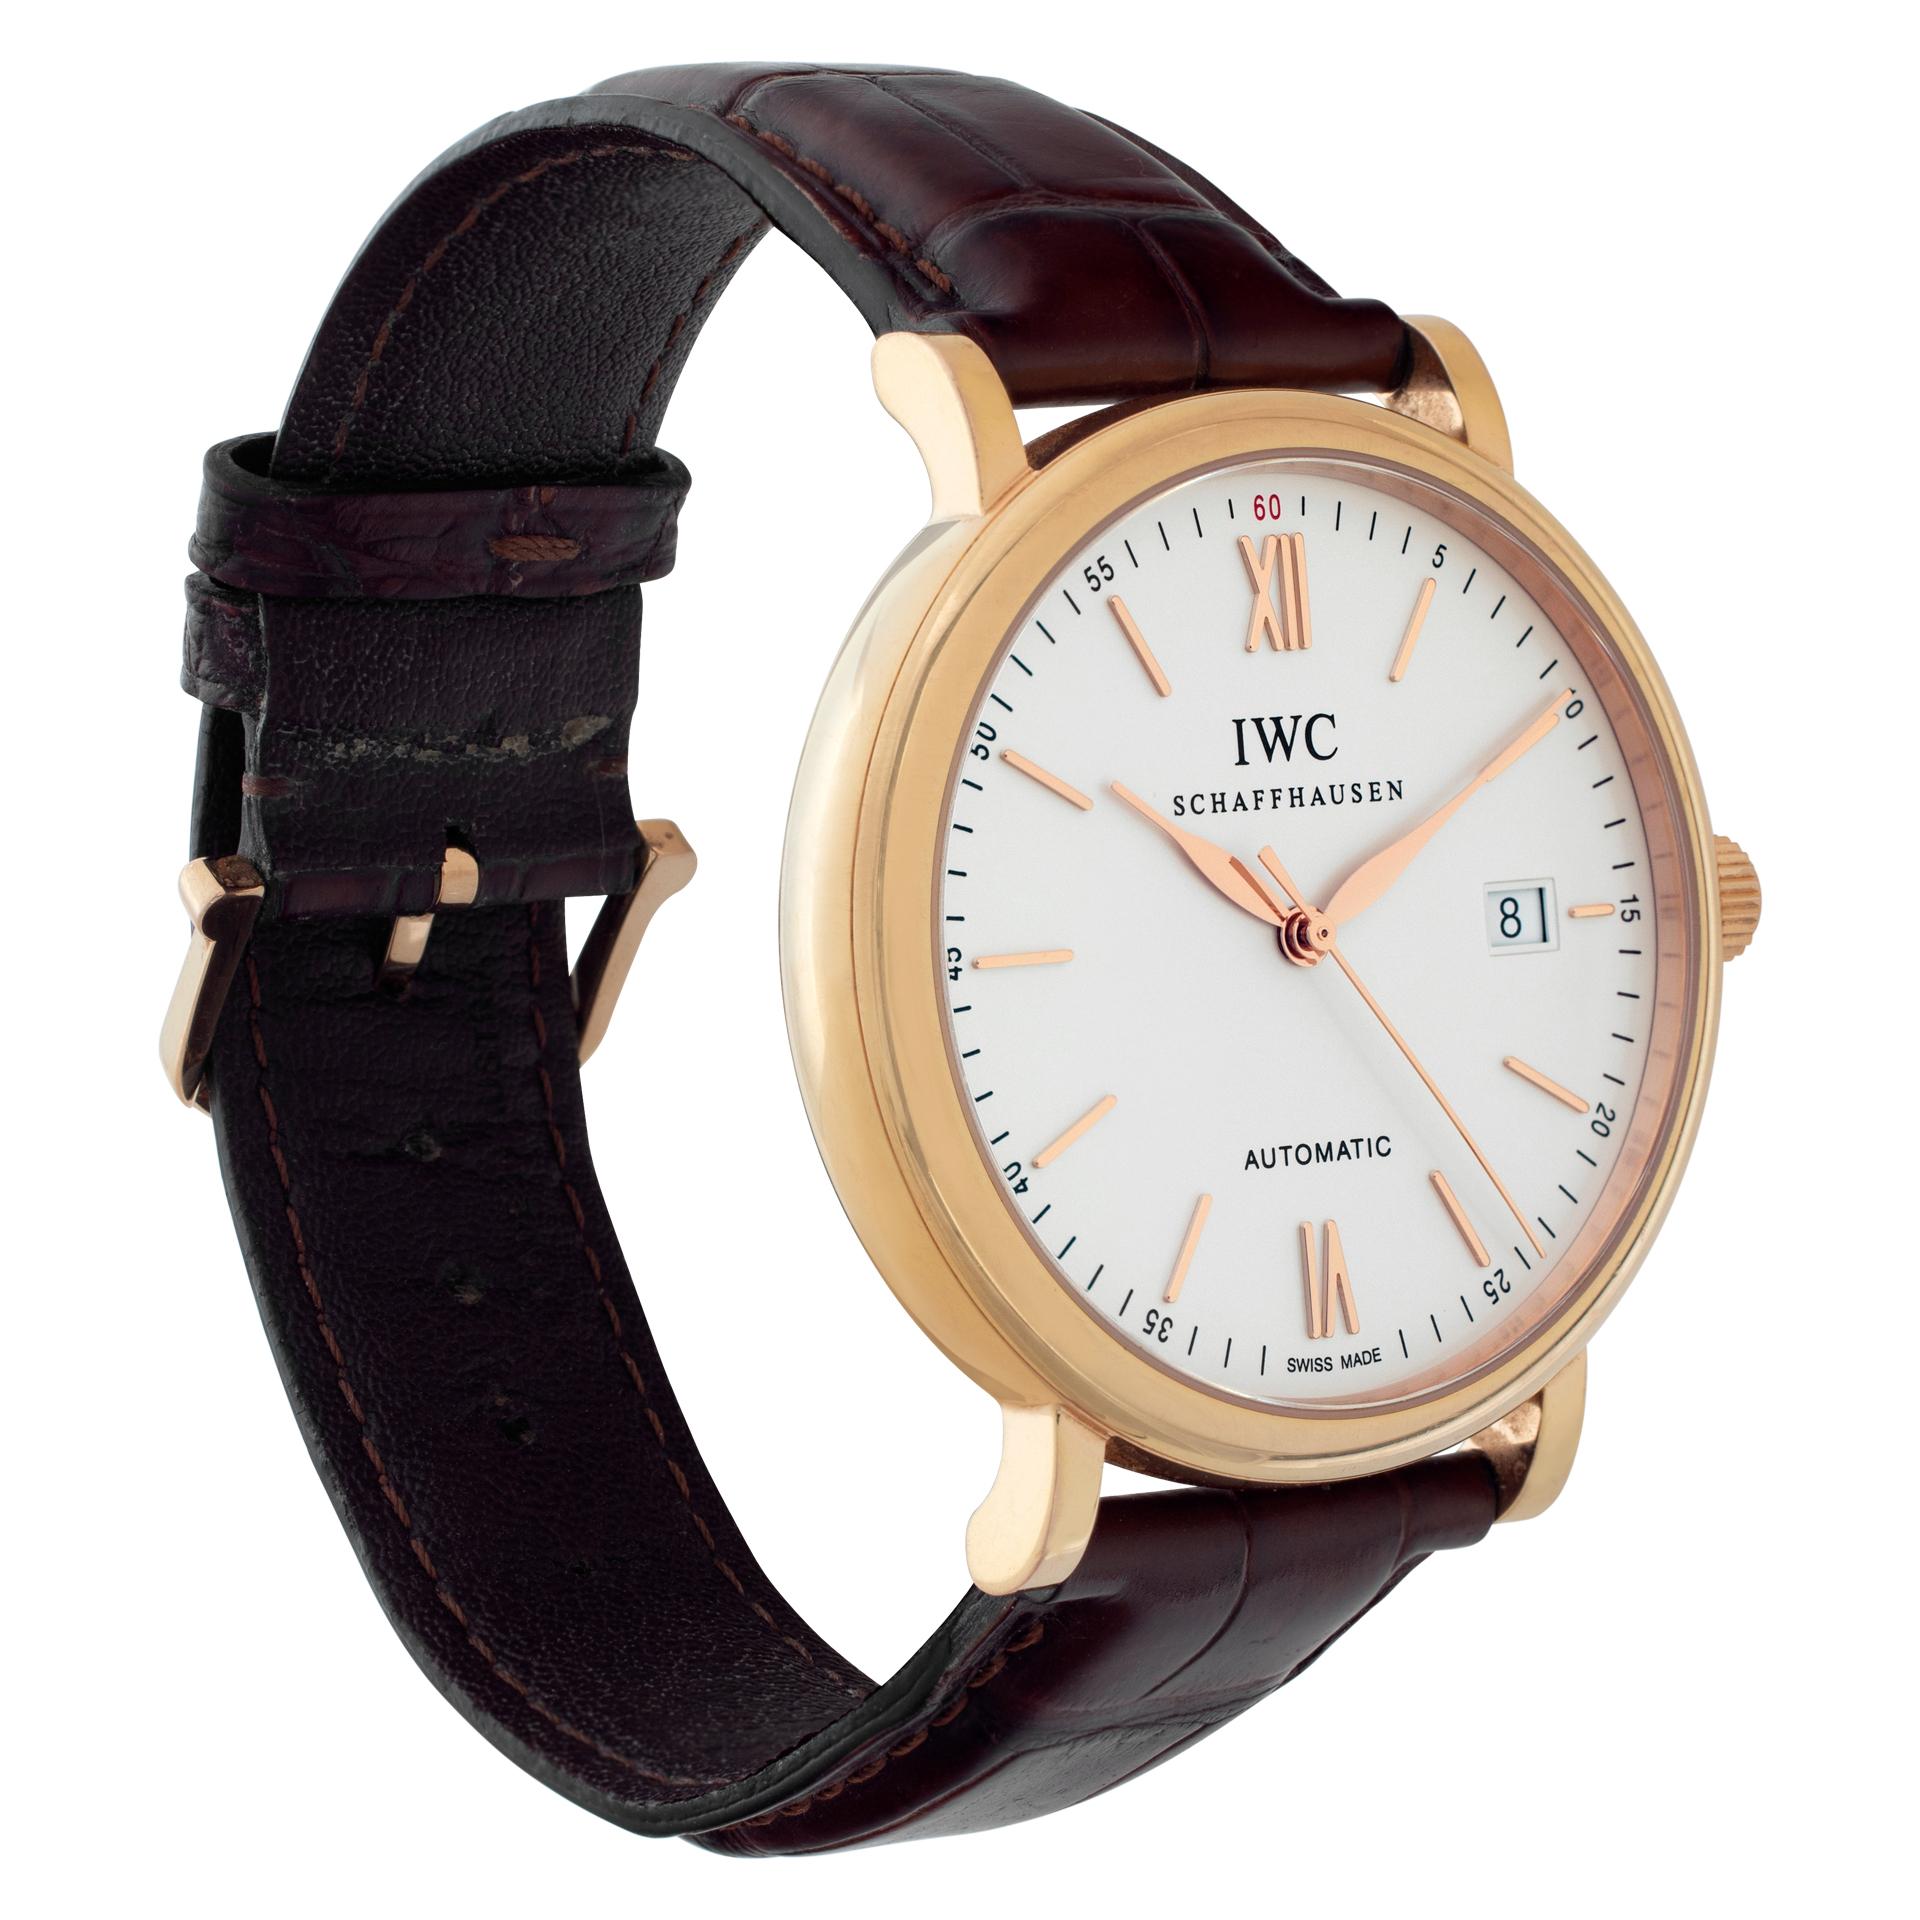 IWC Portofino iw356504 in rose gold with a Silver dial 40mm Automatic watch In Excellent Condition For Sale In Surfside, FL